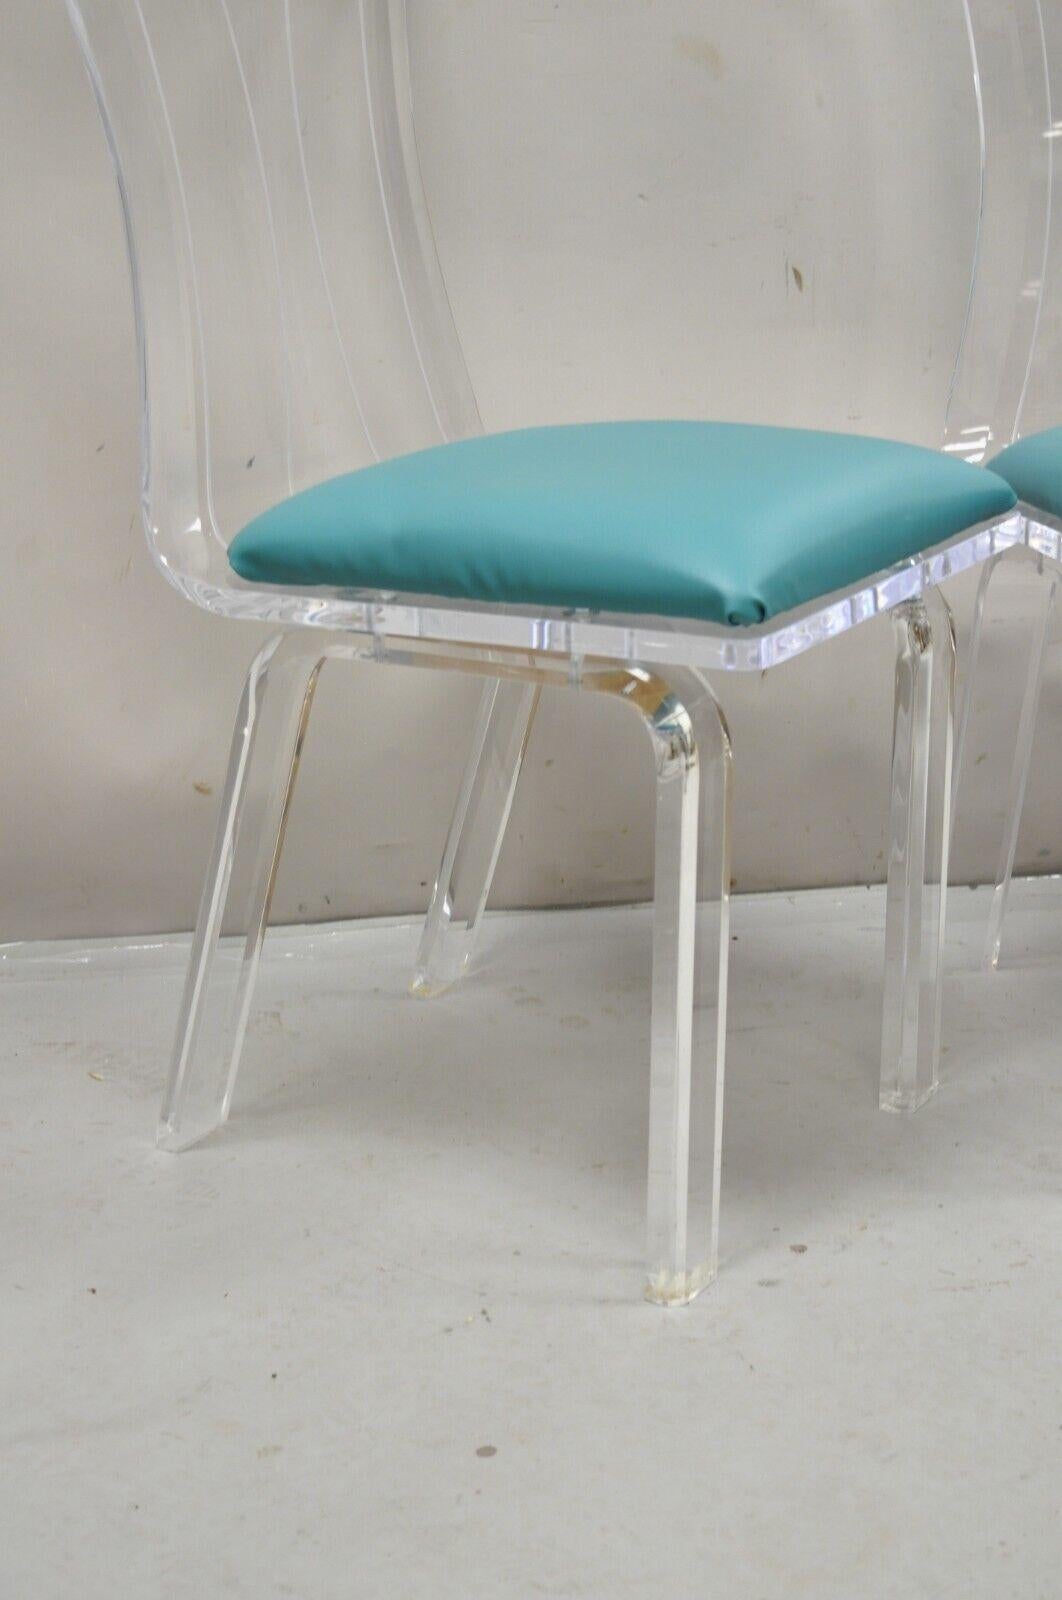 Vintage Lucite Acrylic Mid Century Sculptural Dining Table & 4 Chairs - 5 Pc Set For Sale 2